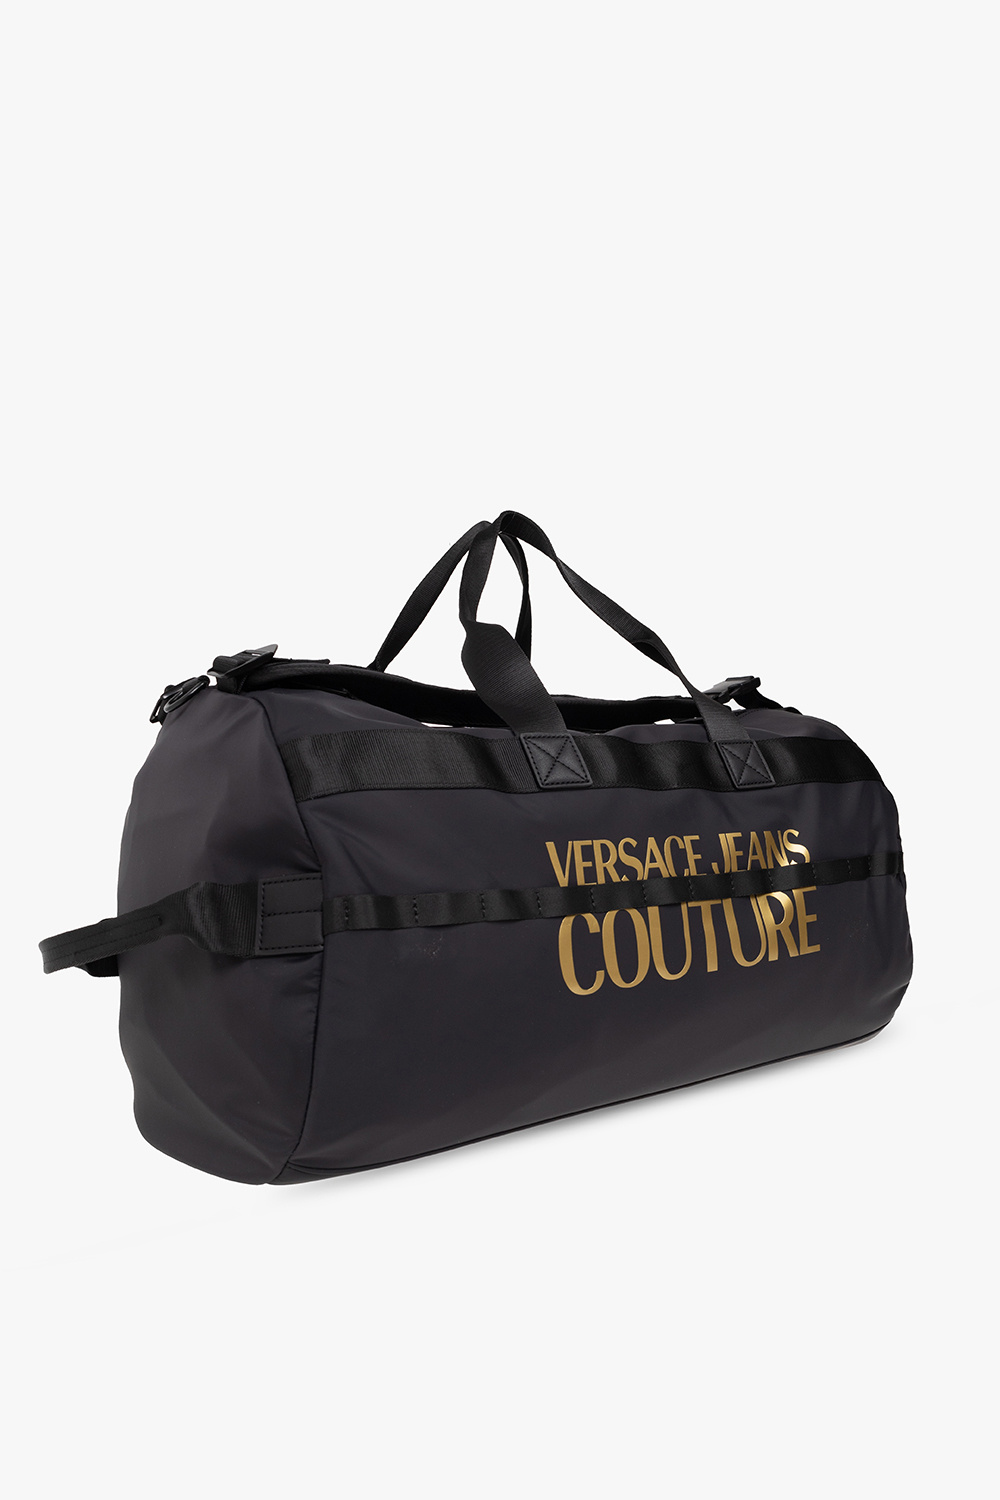 Versace Jeans Couture black bag with logo